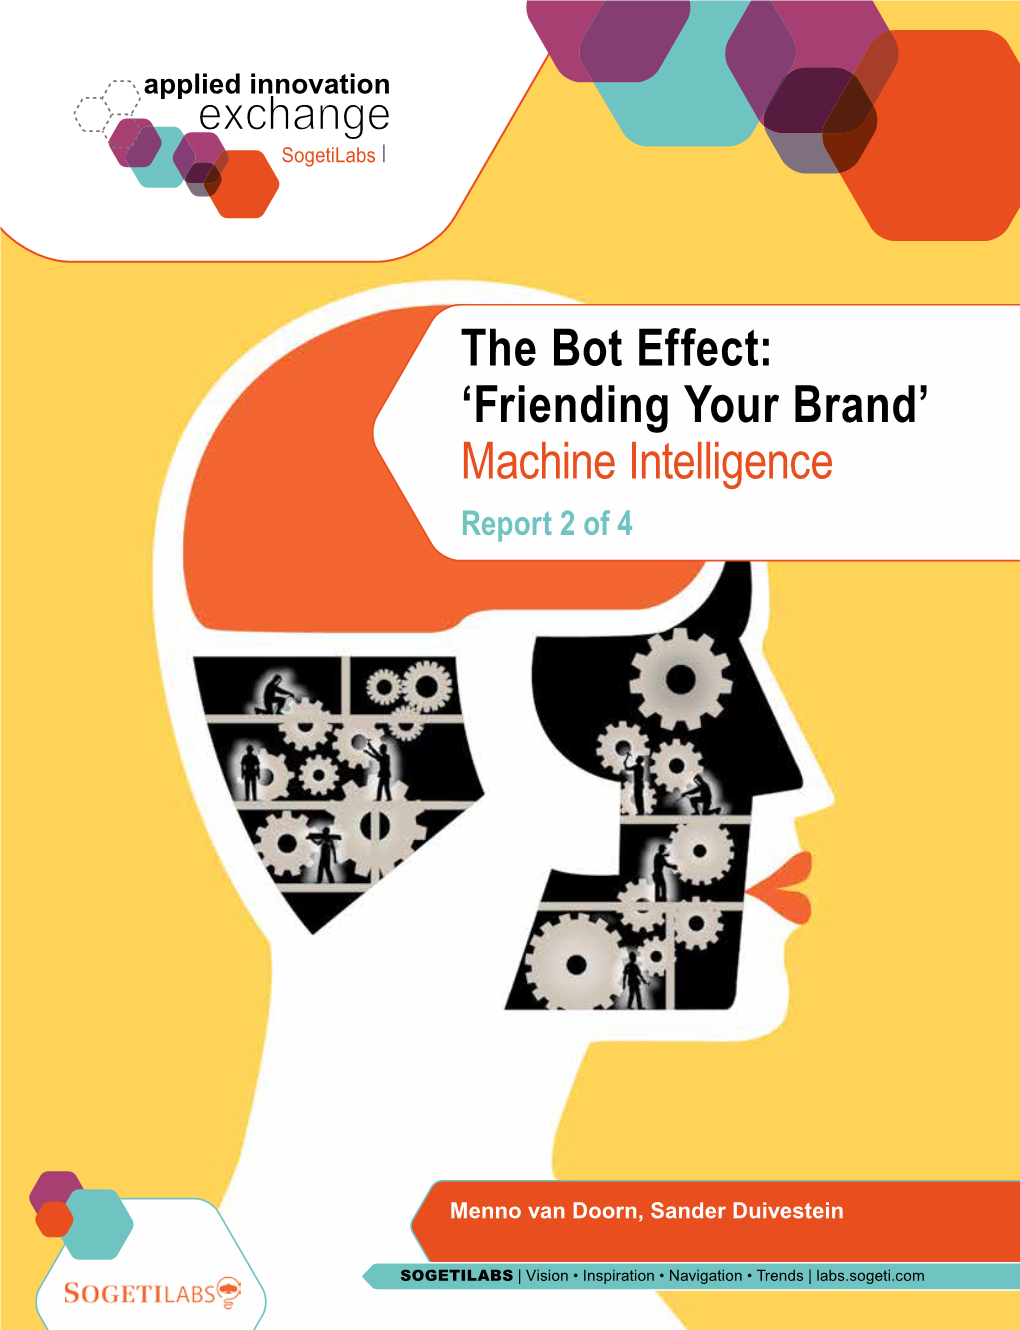 The Bot Effect: ‘Friending Your Brand’ Machine Intelligence Report 2 of 4